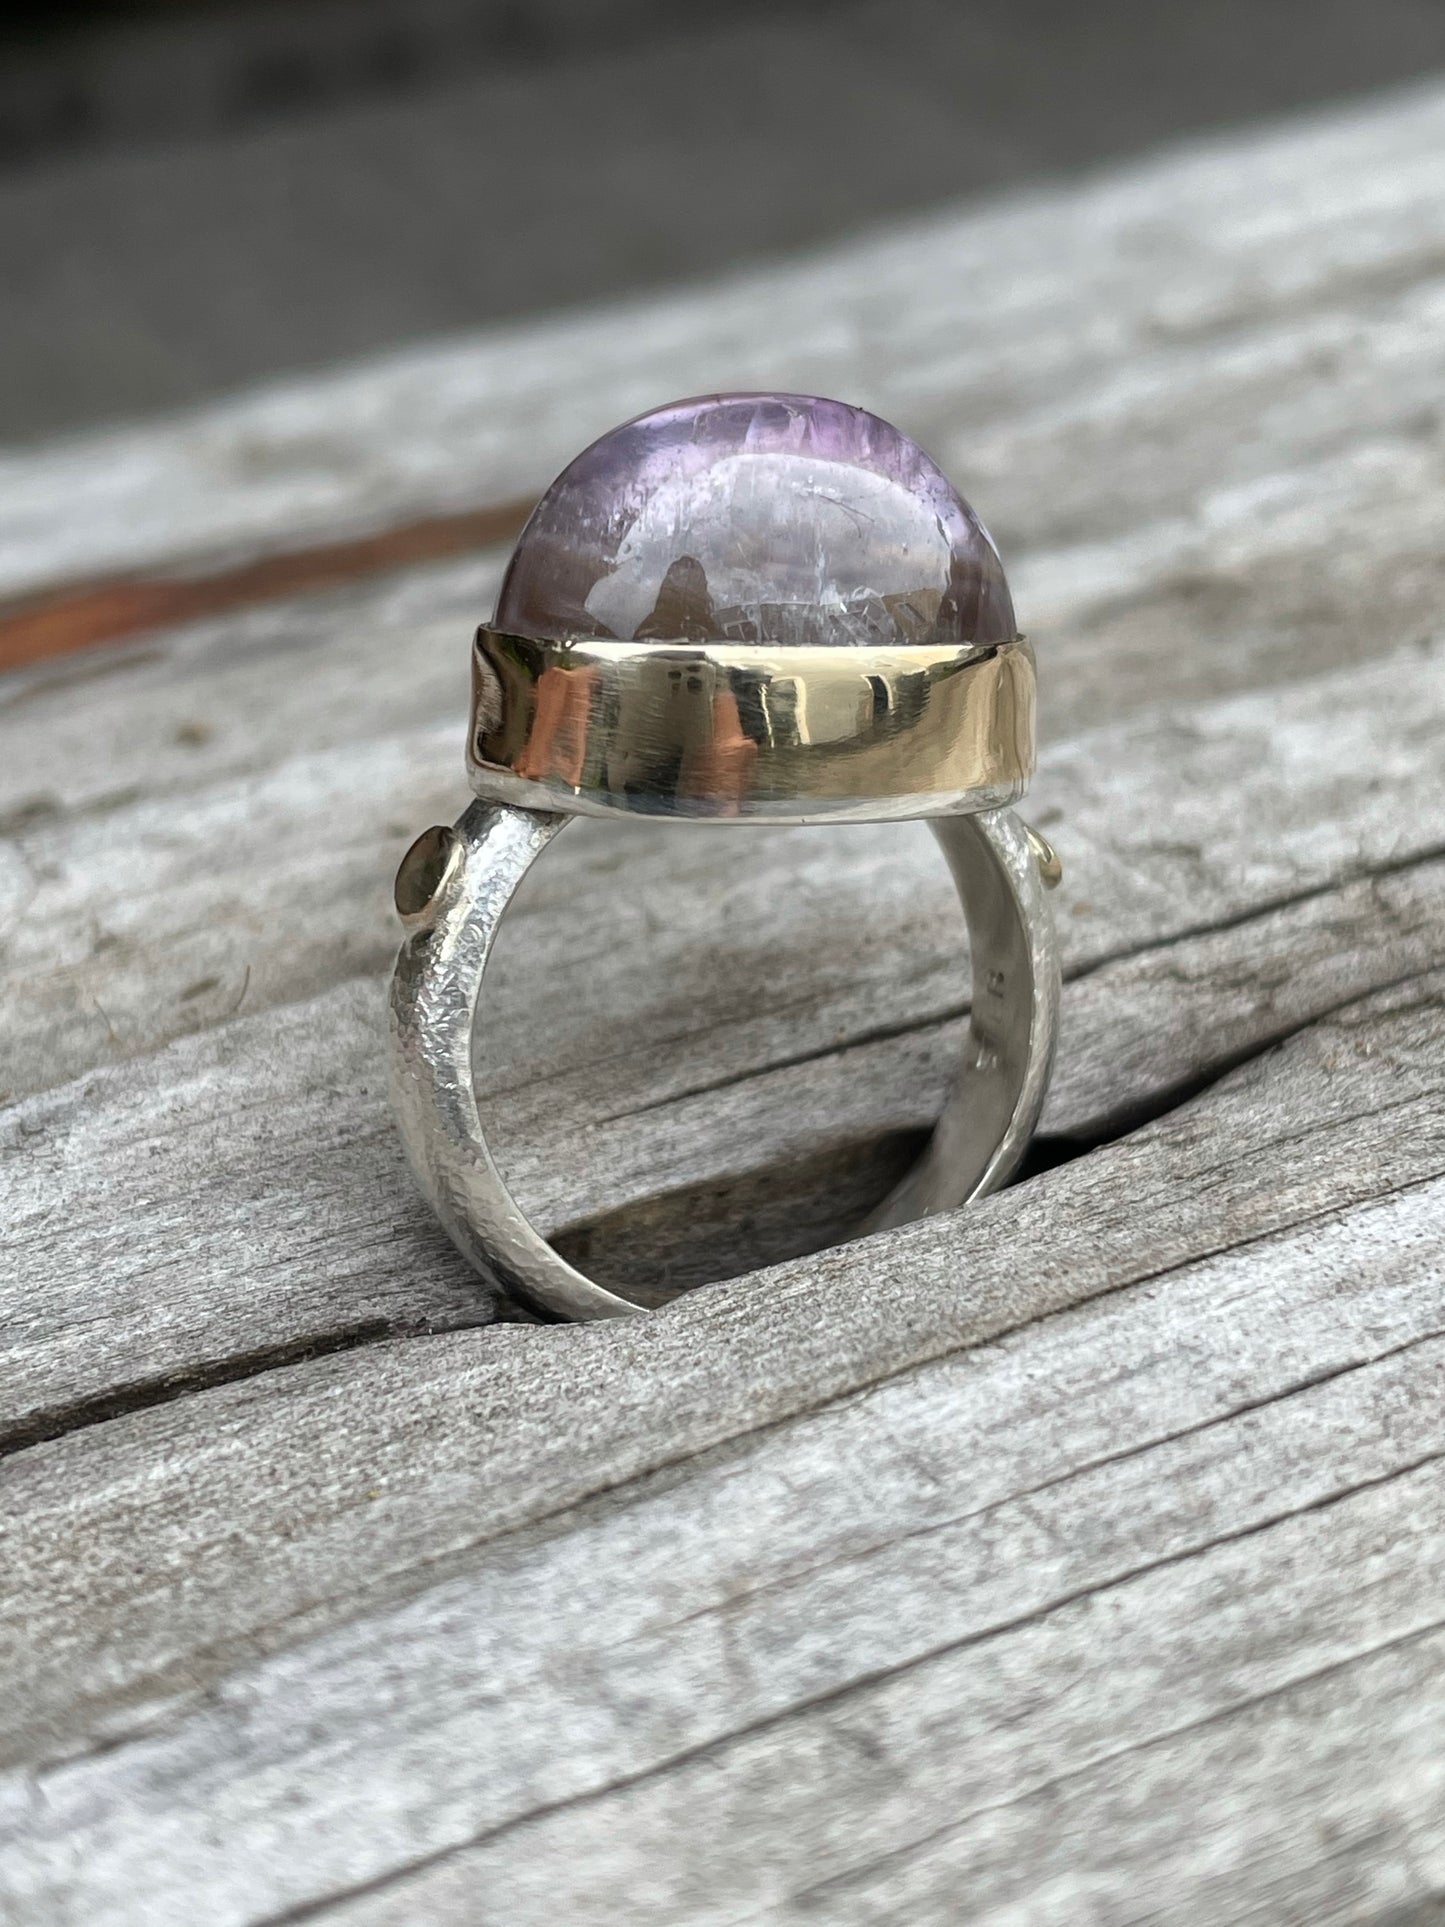 a side view of this purple domed ring with a gold band and a silver shank sits in a piece of grey drift wood